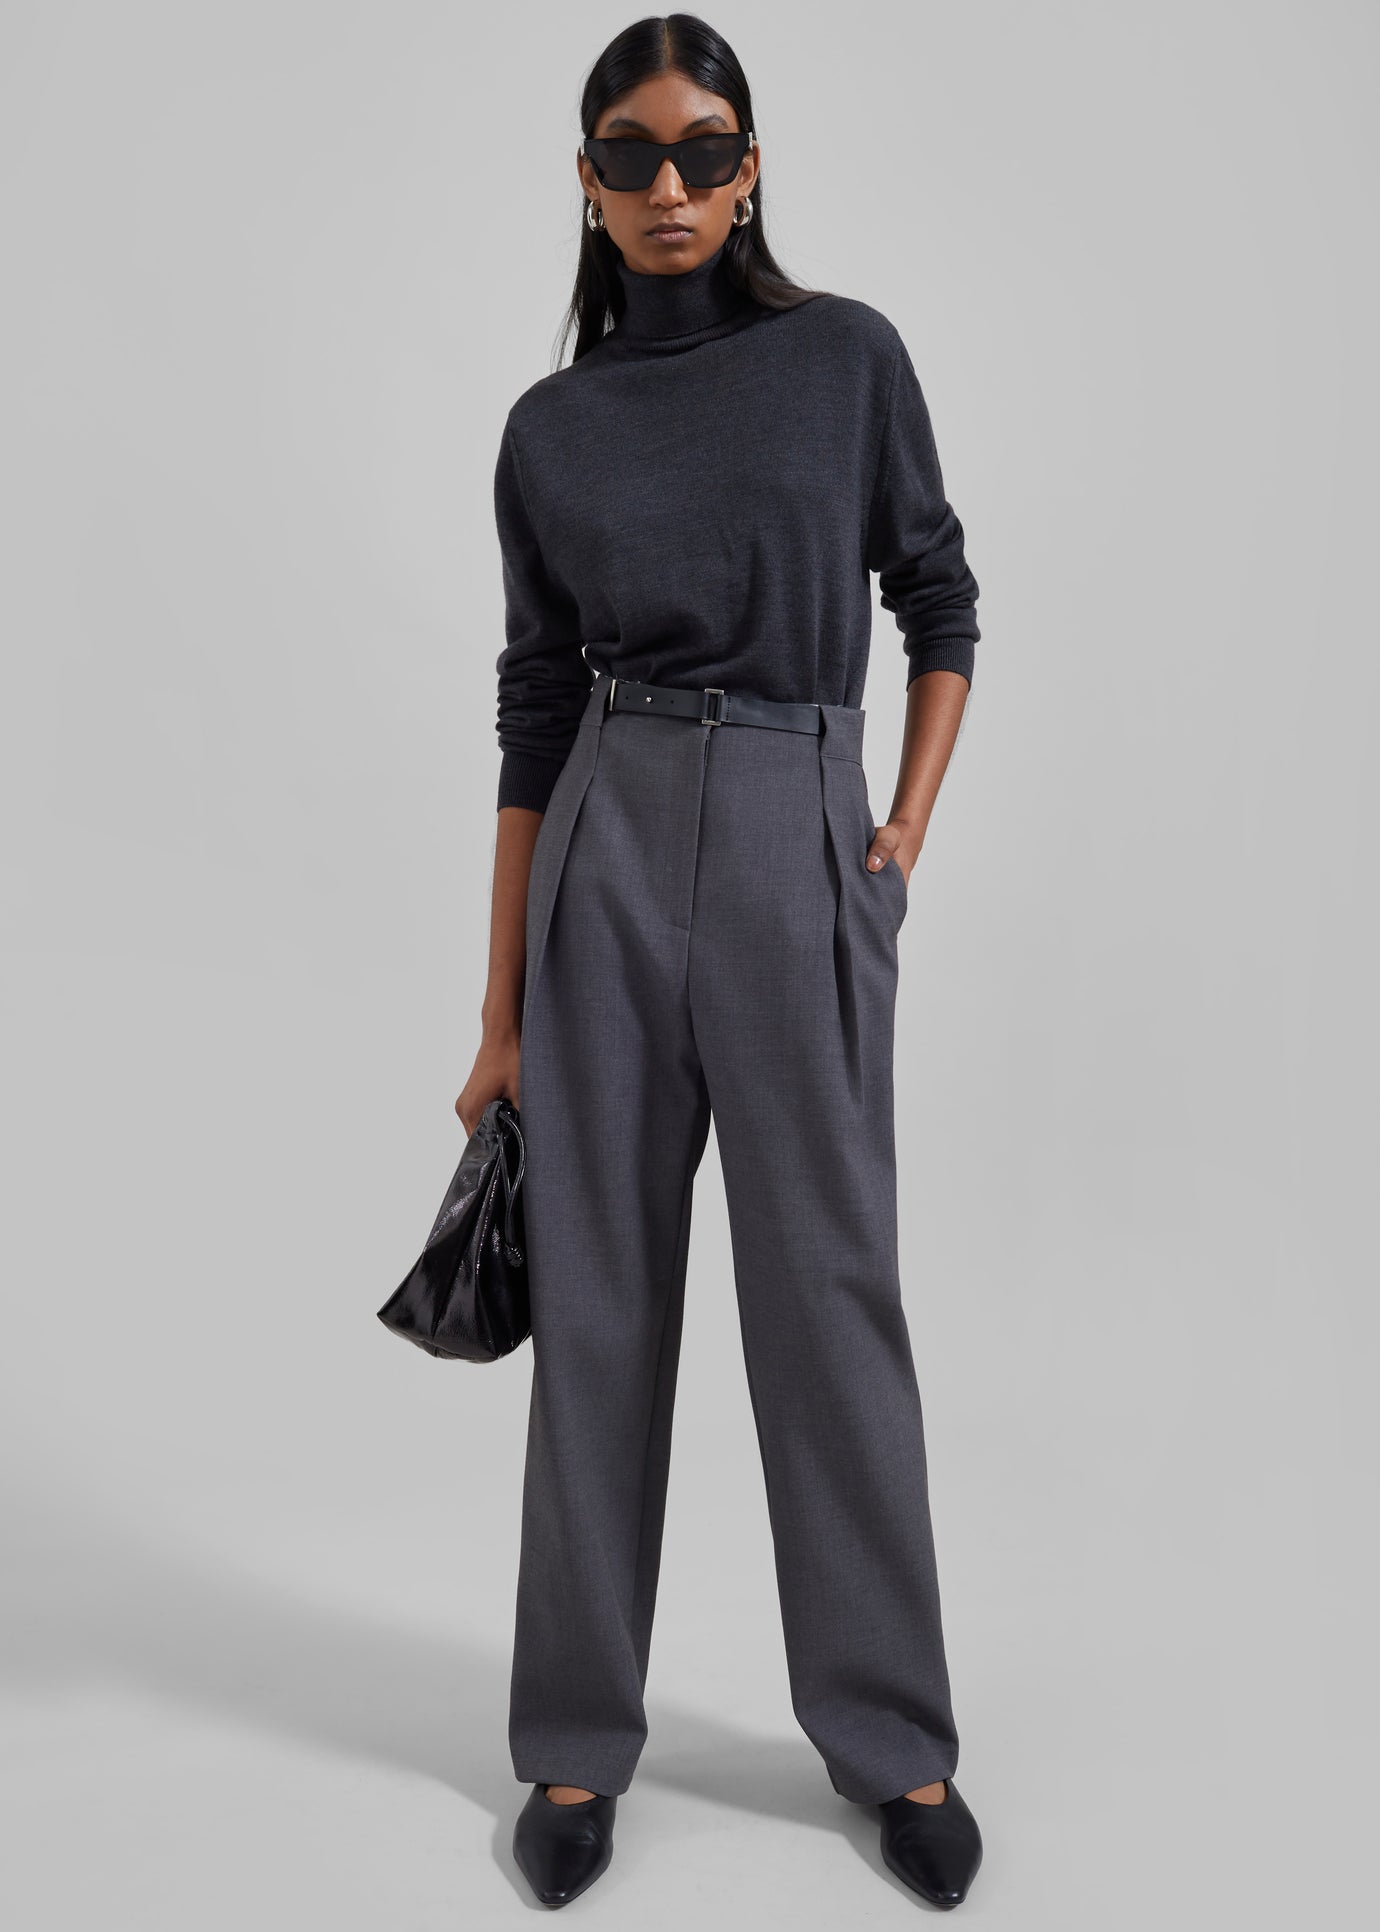 Corinne Belted Pants - Charcoal